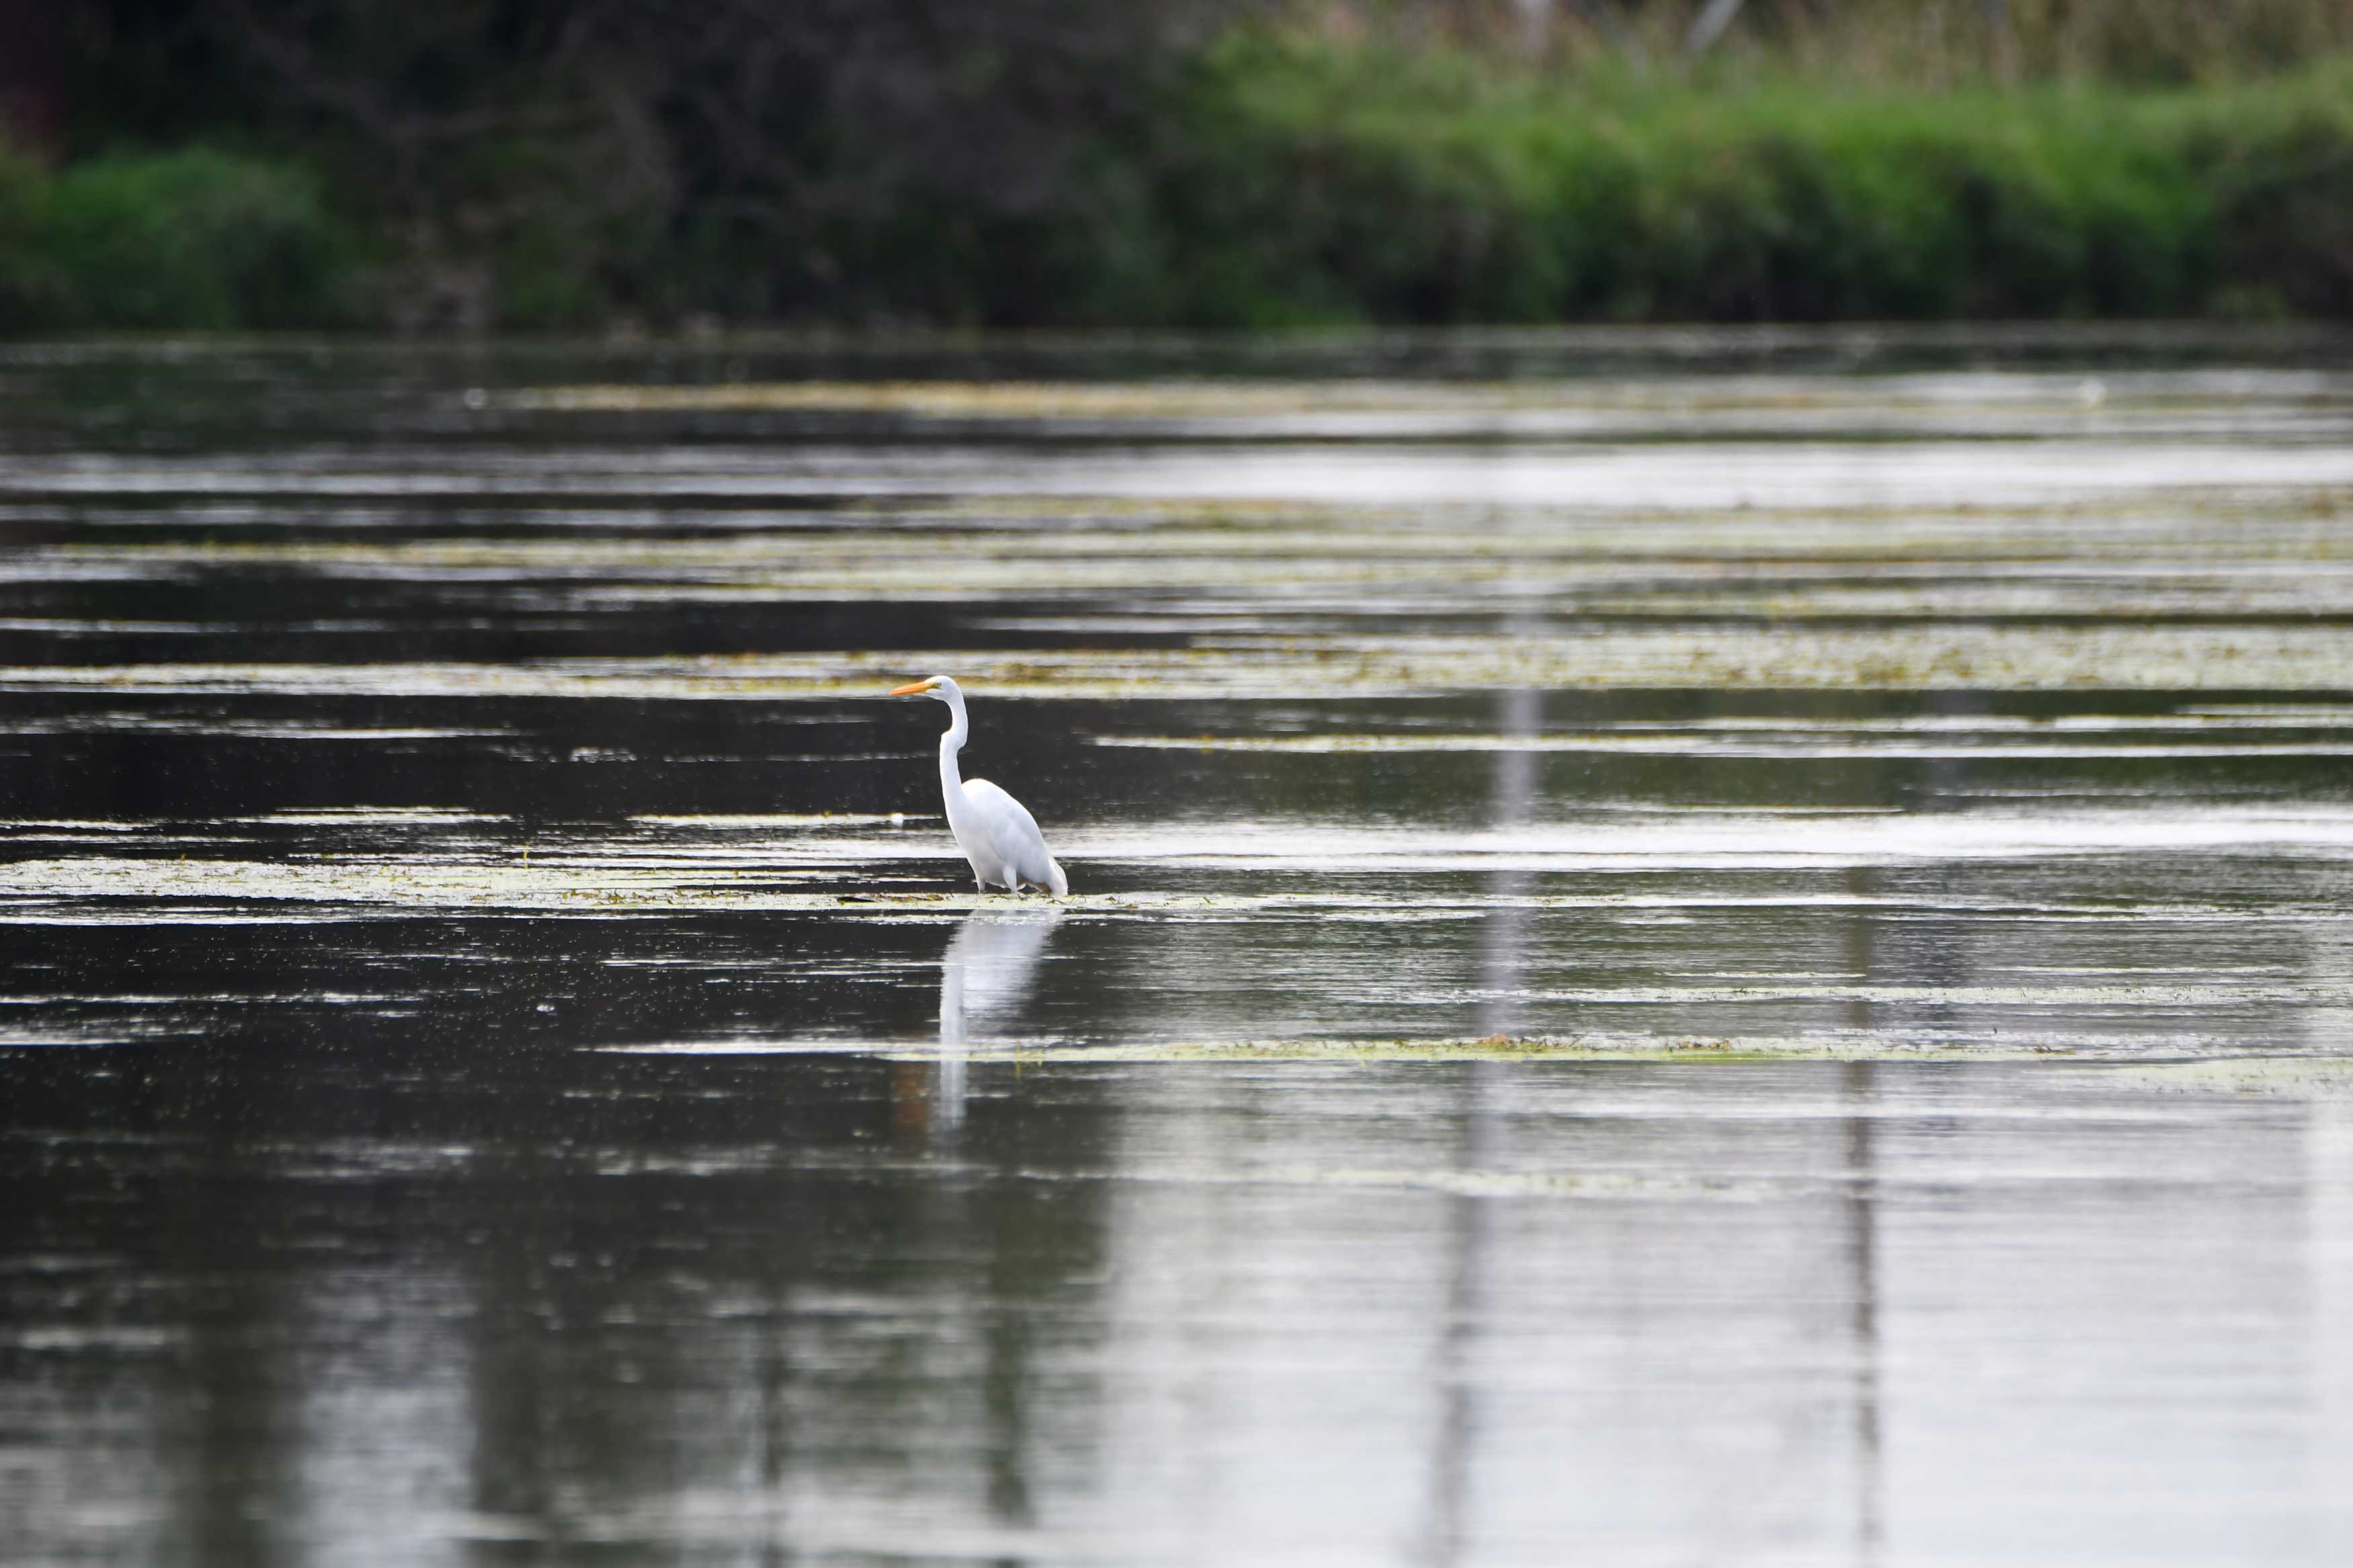 An egret stands in shallow water